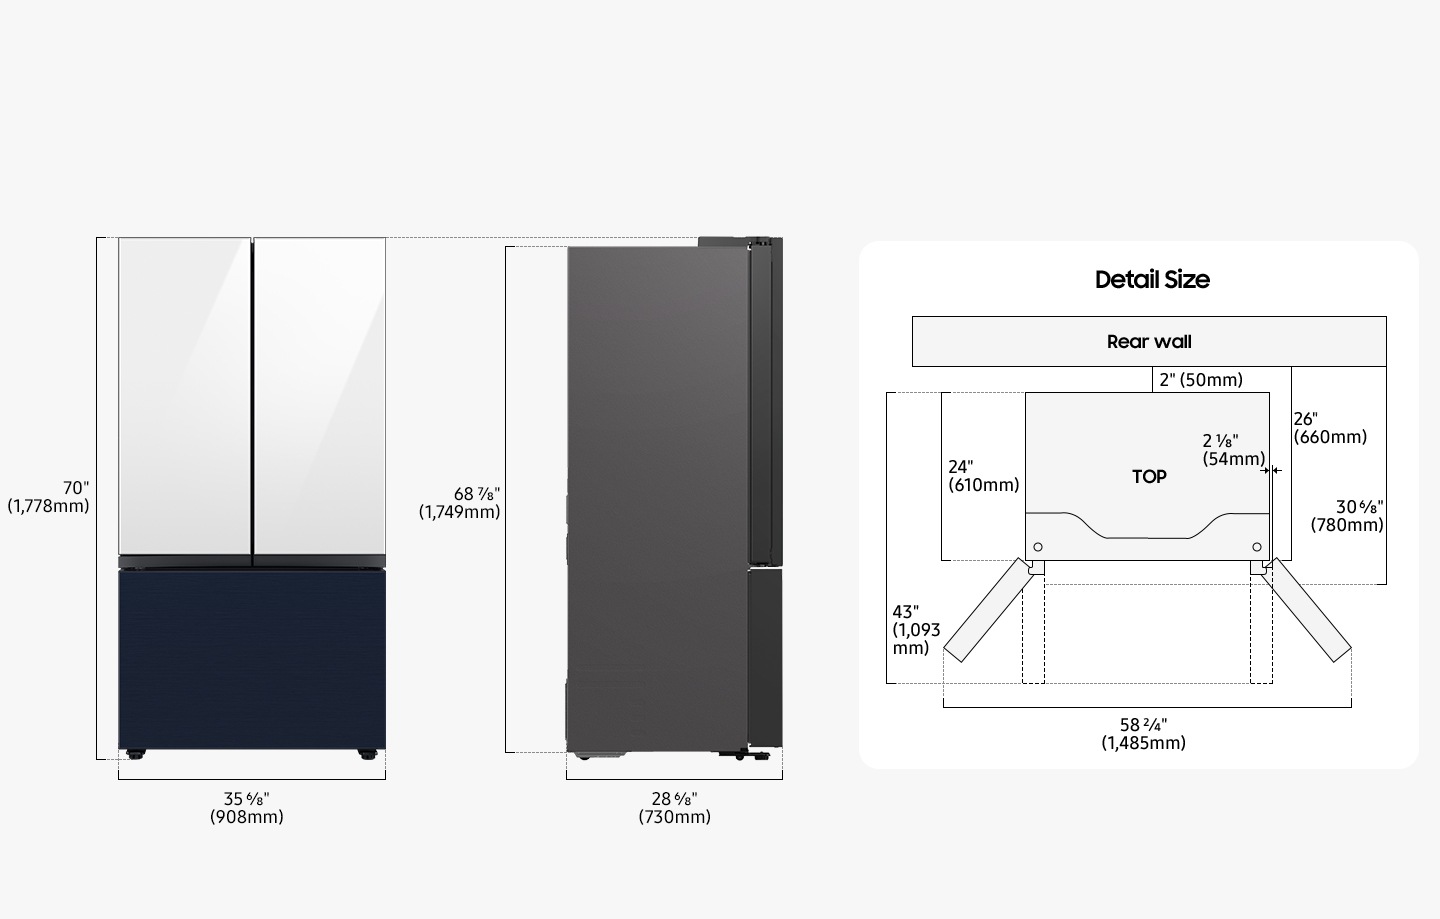 The Refrigerator is 70inches(1,778mm) in height including the door, 35 6/8 inches(908mm) in width, 28 6/8 inches(730mm) in depth, and 68⅞ inches(1,749mm) in height excluding the door from the rear. When installing, the refrigerator must be at least 2inches(50mm) away from the back wall. The depth including the space between the refrigerator and the back wall and the refrigerator body is 26inches(660mm), and the depth including the space between the refrigerator and the back wall and the refrigerator body and the refrigerator door is 30 6⁄8 inches(780mm).  The depth of installed Refrigerator including the door closed is 24inches(610mm), and the depth of the installed refrigerator including the door opened to 90 degrees is 43inches(1,093mm) and the refrigerator door also protrudes 2 1/8 inches(54mm) from the refrigerator body. The width when both doors are fully opened is 58 2⁄4 inches(1,485mm).